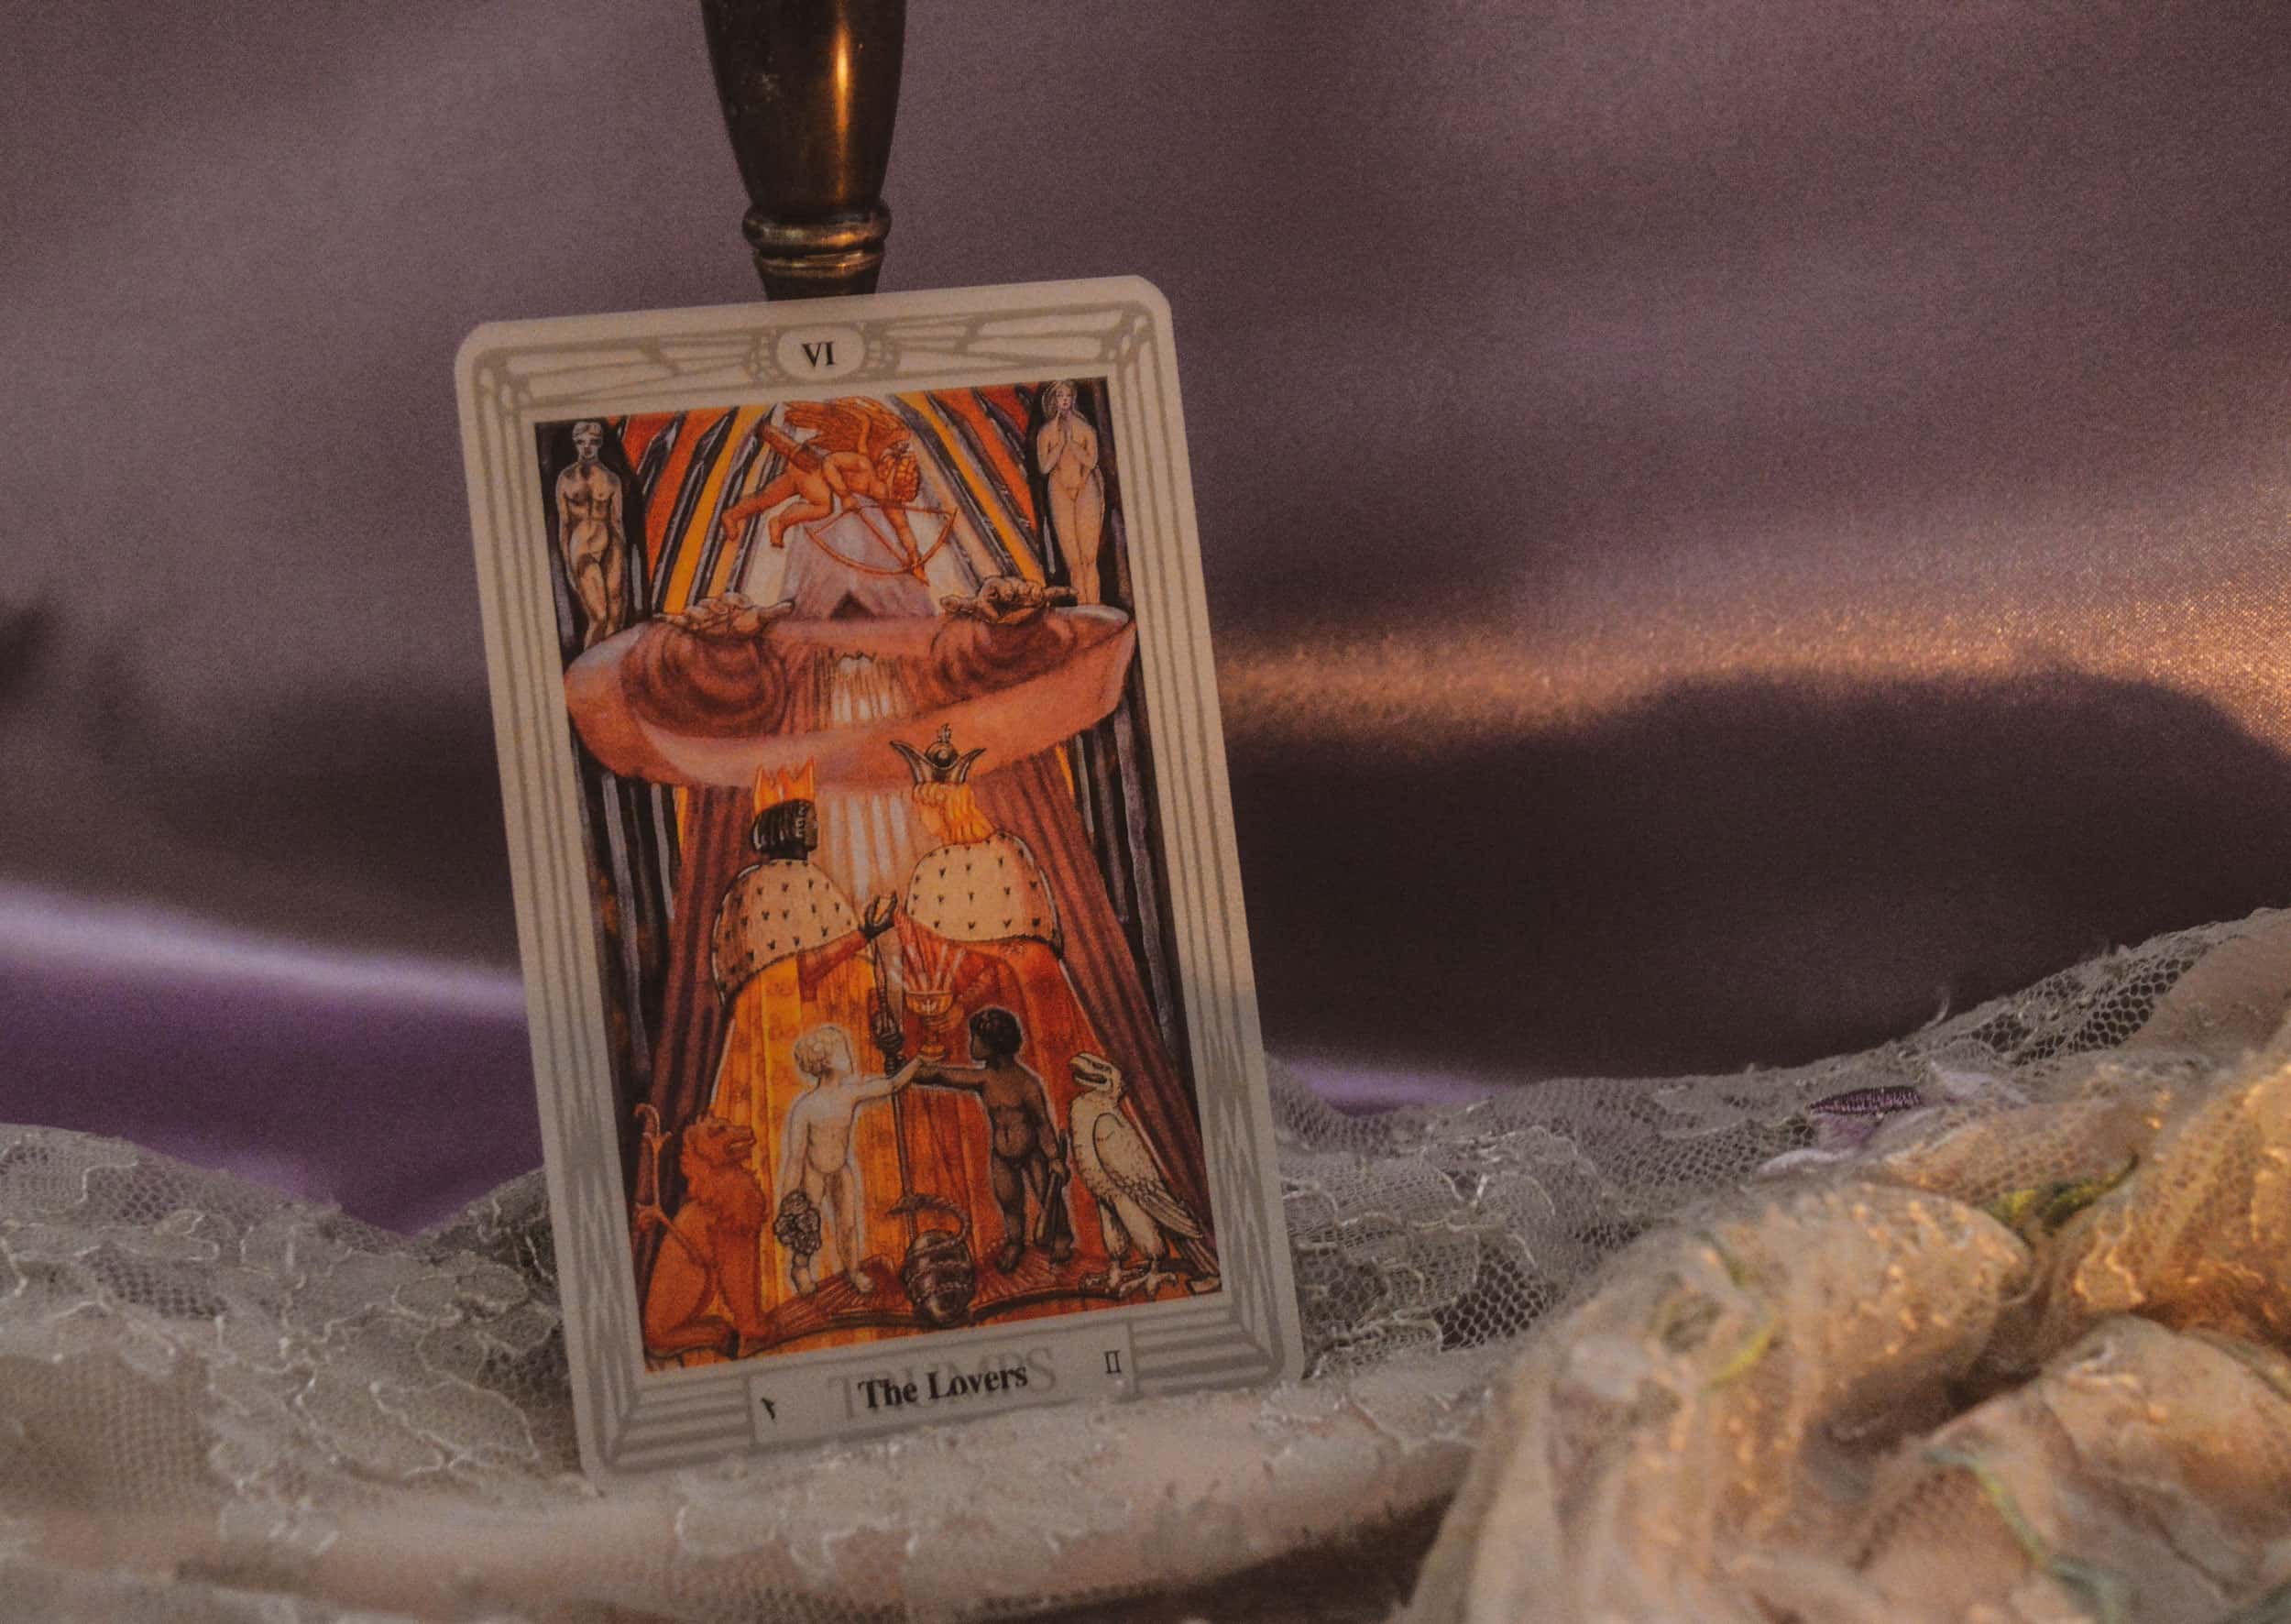 GEMINI POWER CARD: The Lovers Soul connections. Choices. Balancing of opposites to create wholeness. Honest communication. From the Crowley Thoth Deck.